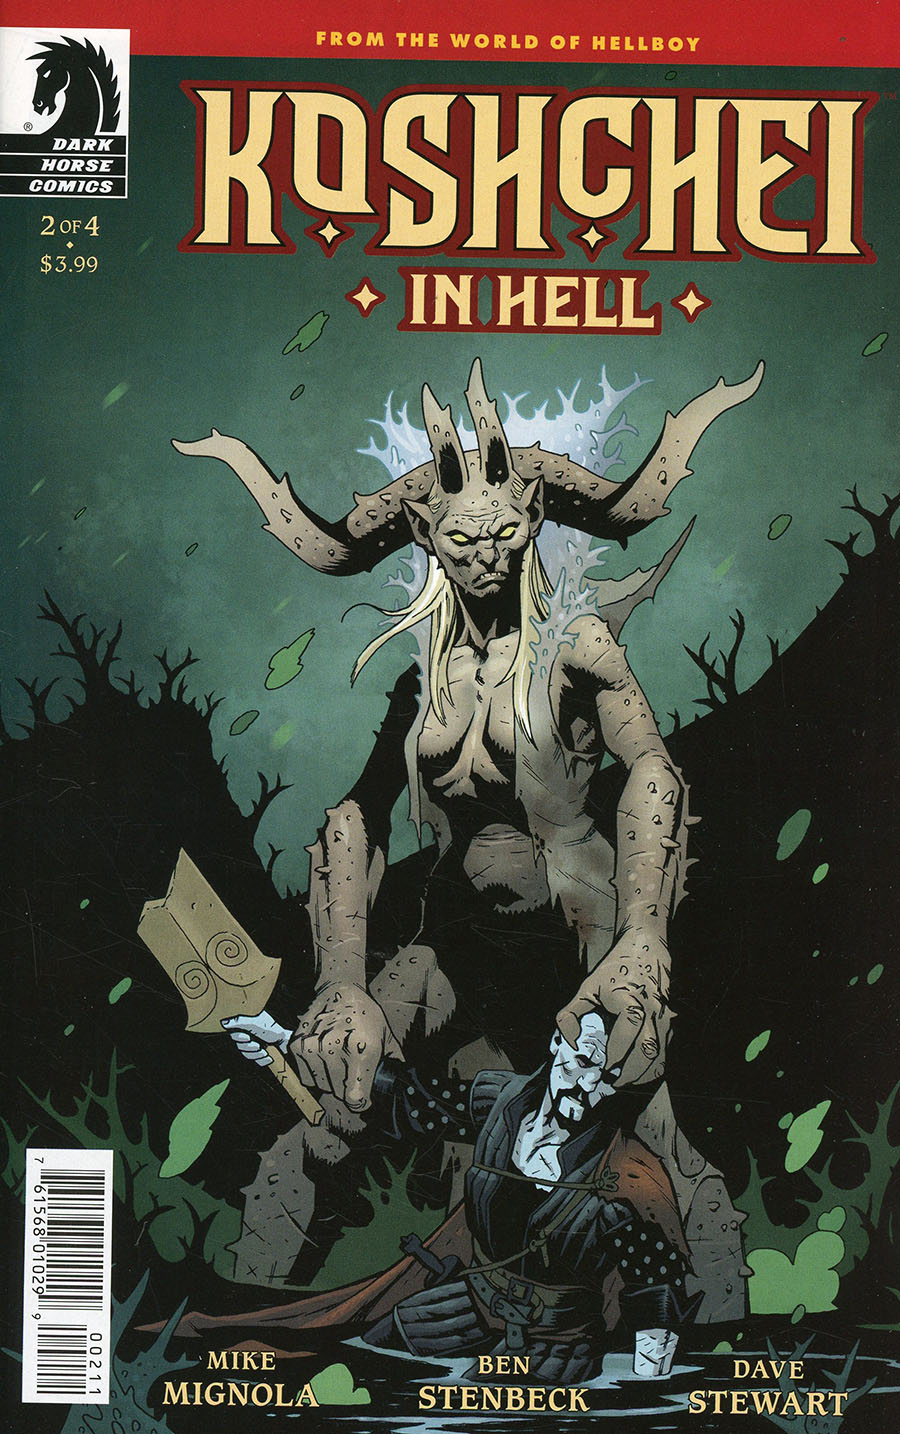 Koshchei The Deathless In Hell #2